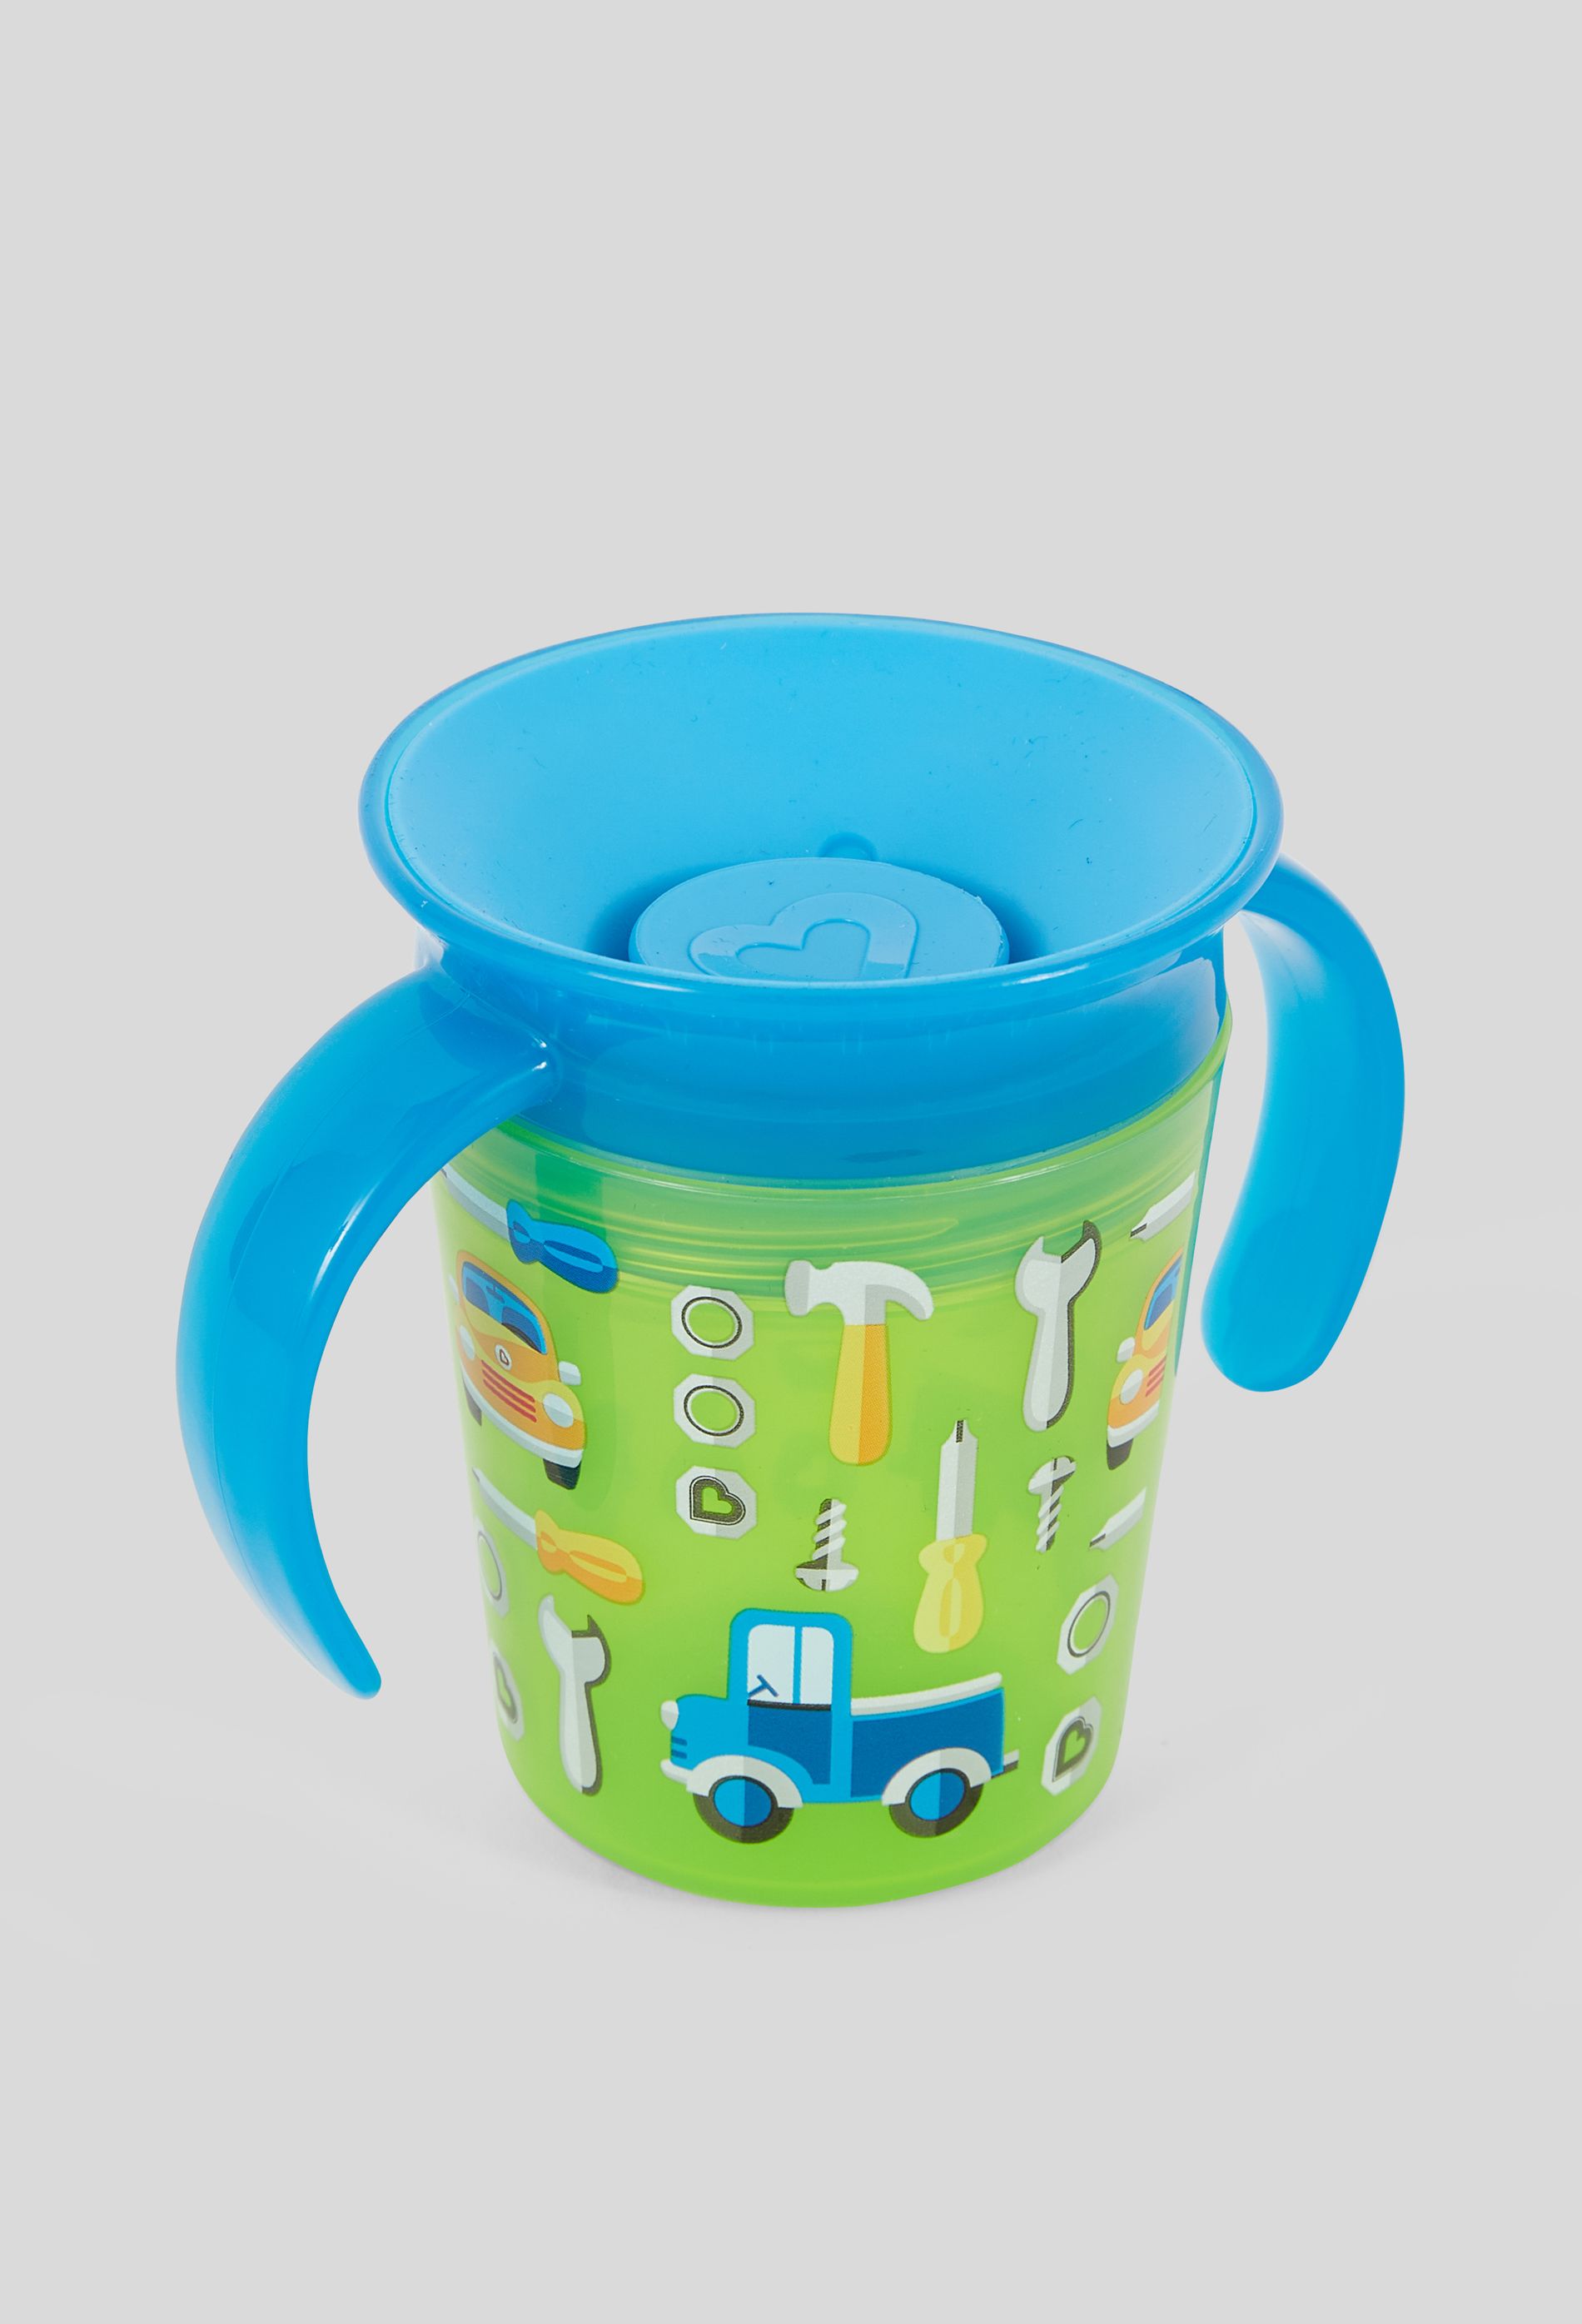 Munchkin Tasse Miracle 360ᵒ Couvercles, multicolores